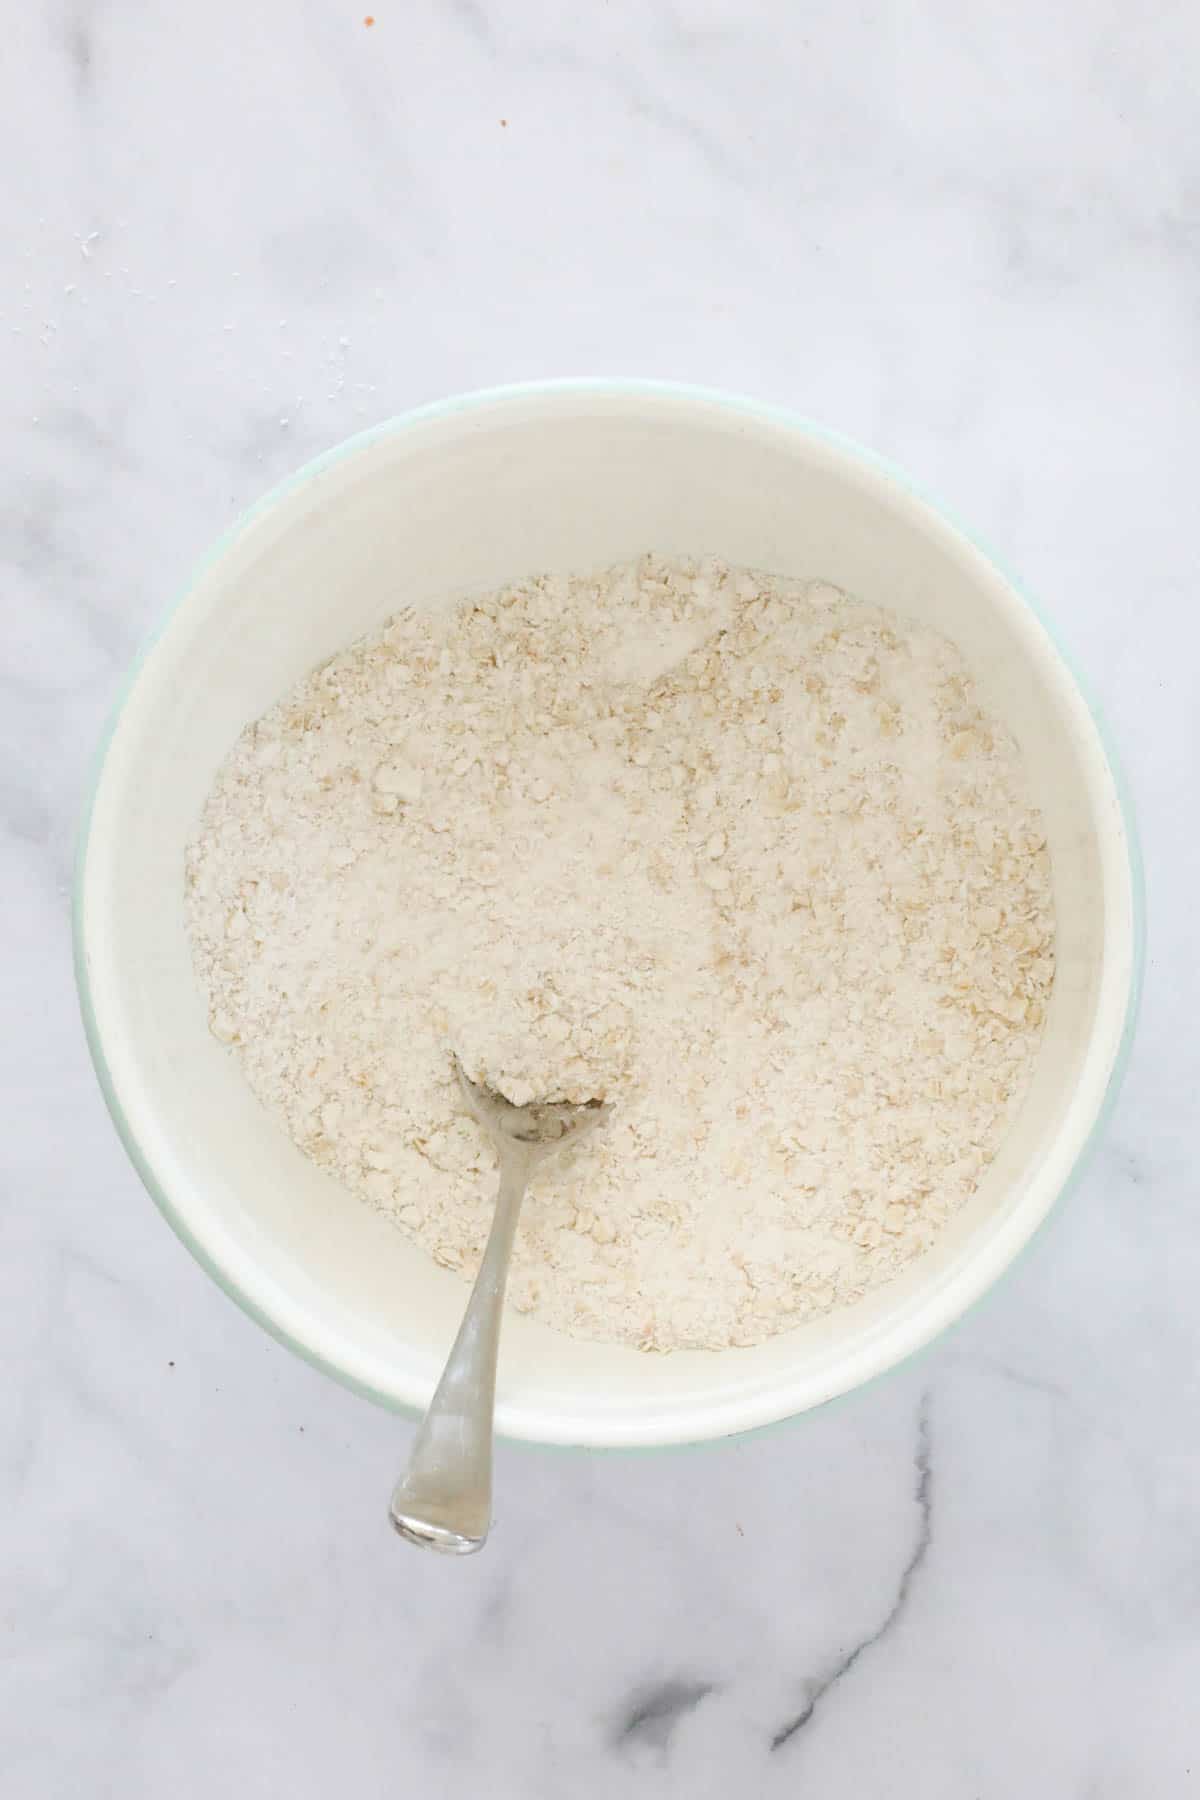 Flour, caster sugar, desiccated coconut mixed in a large bowl.